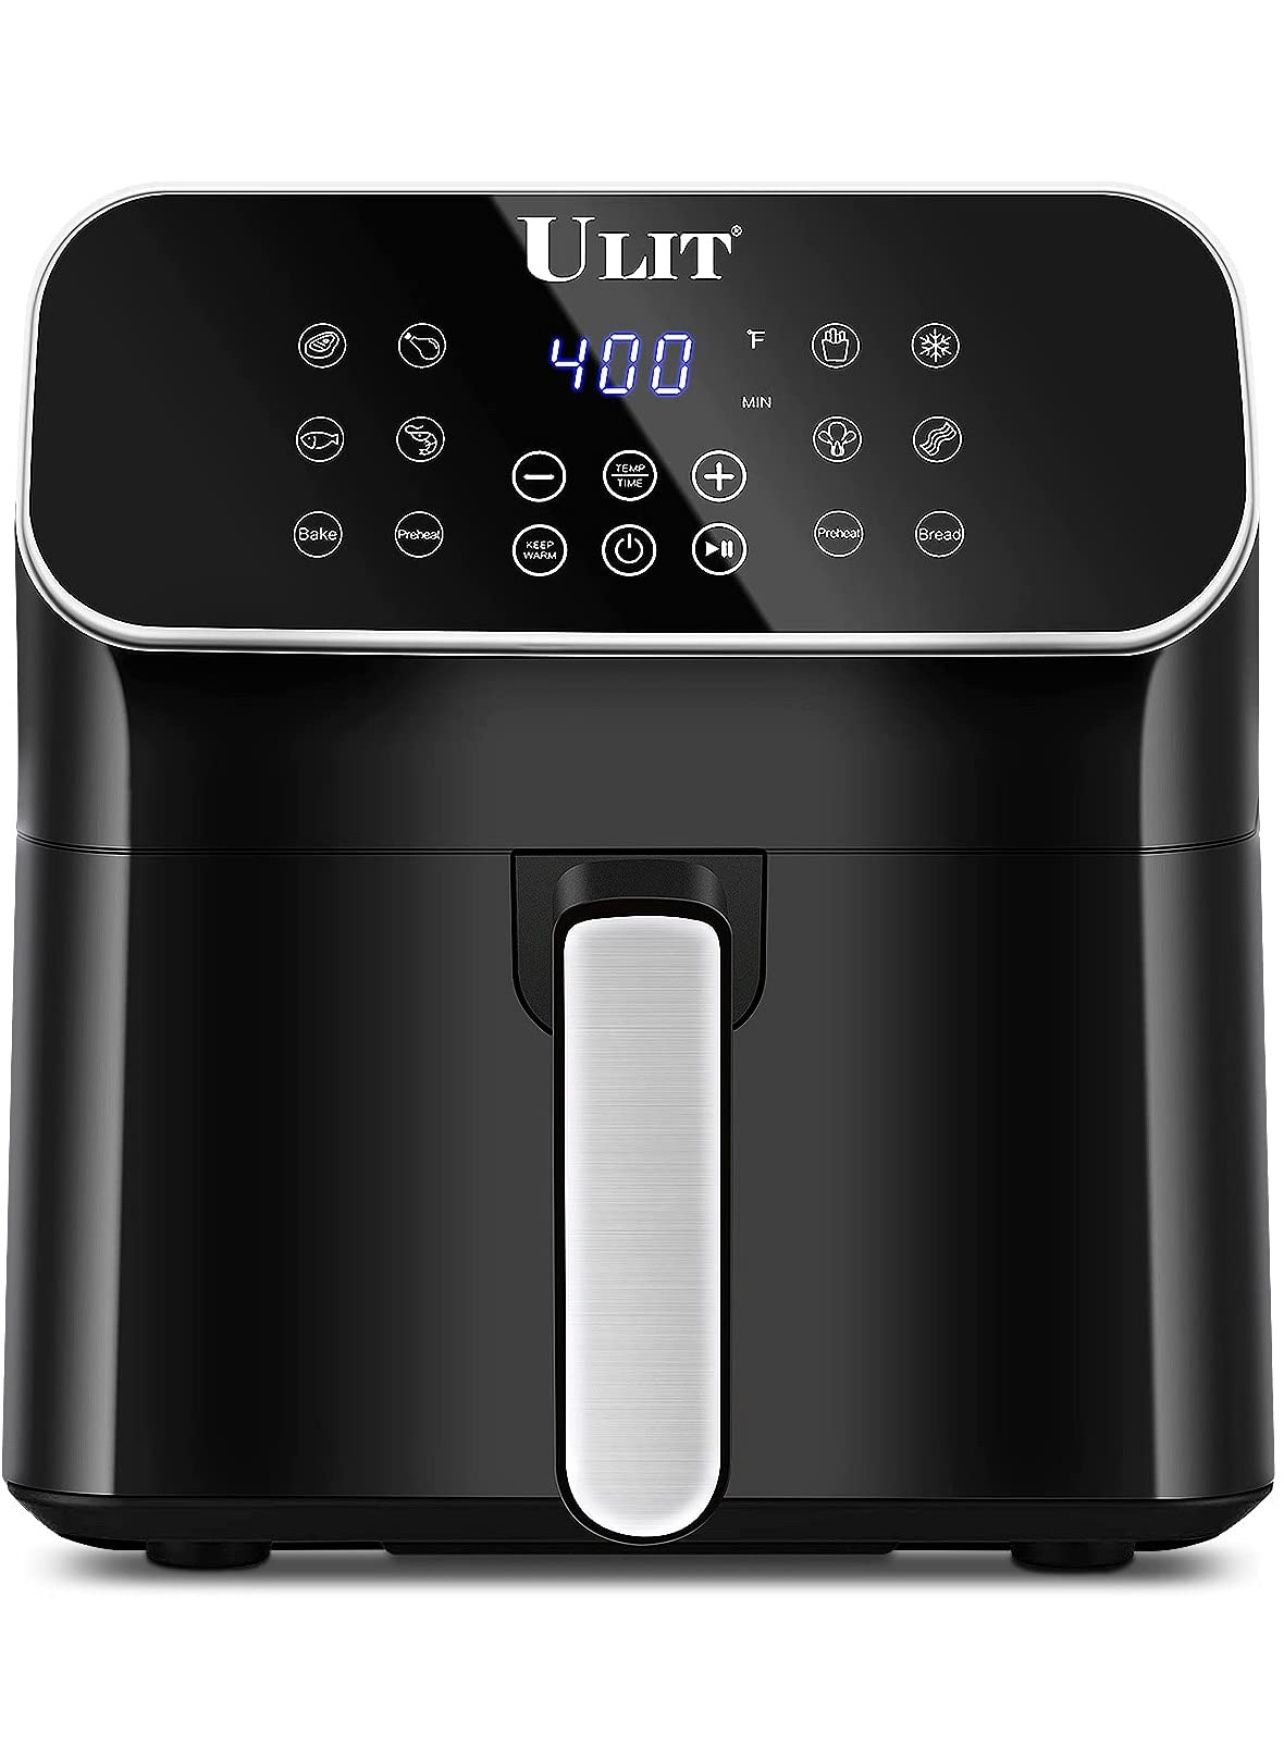 Air Fryers ULIT 6 Quart, Airfryer Toaster Oven, Digital Touch Screen 